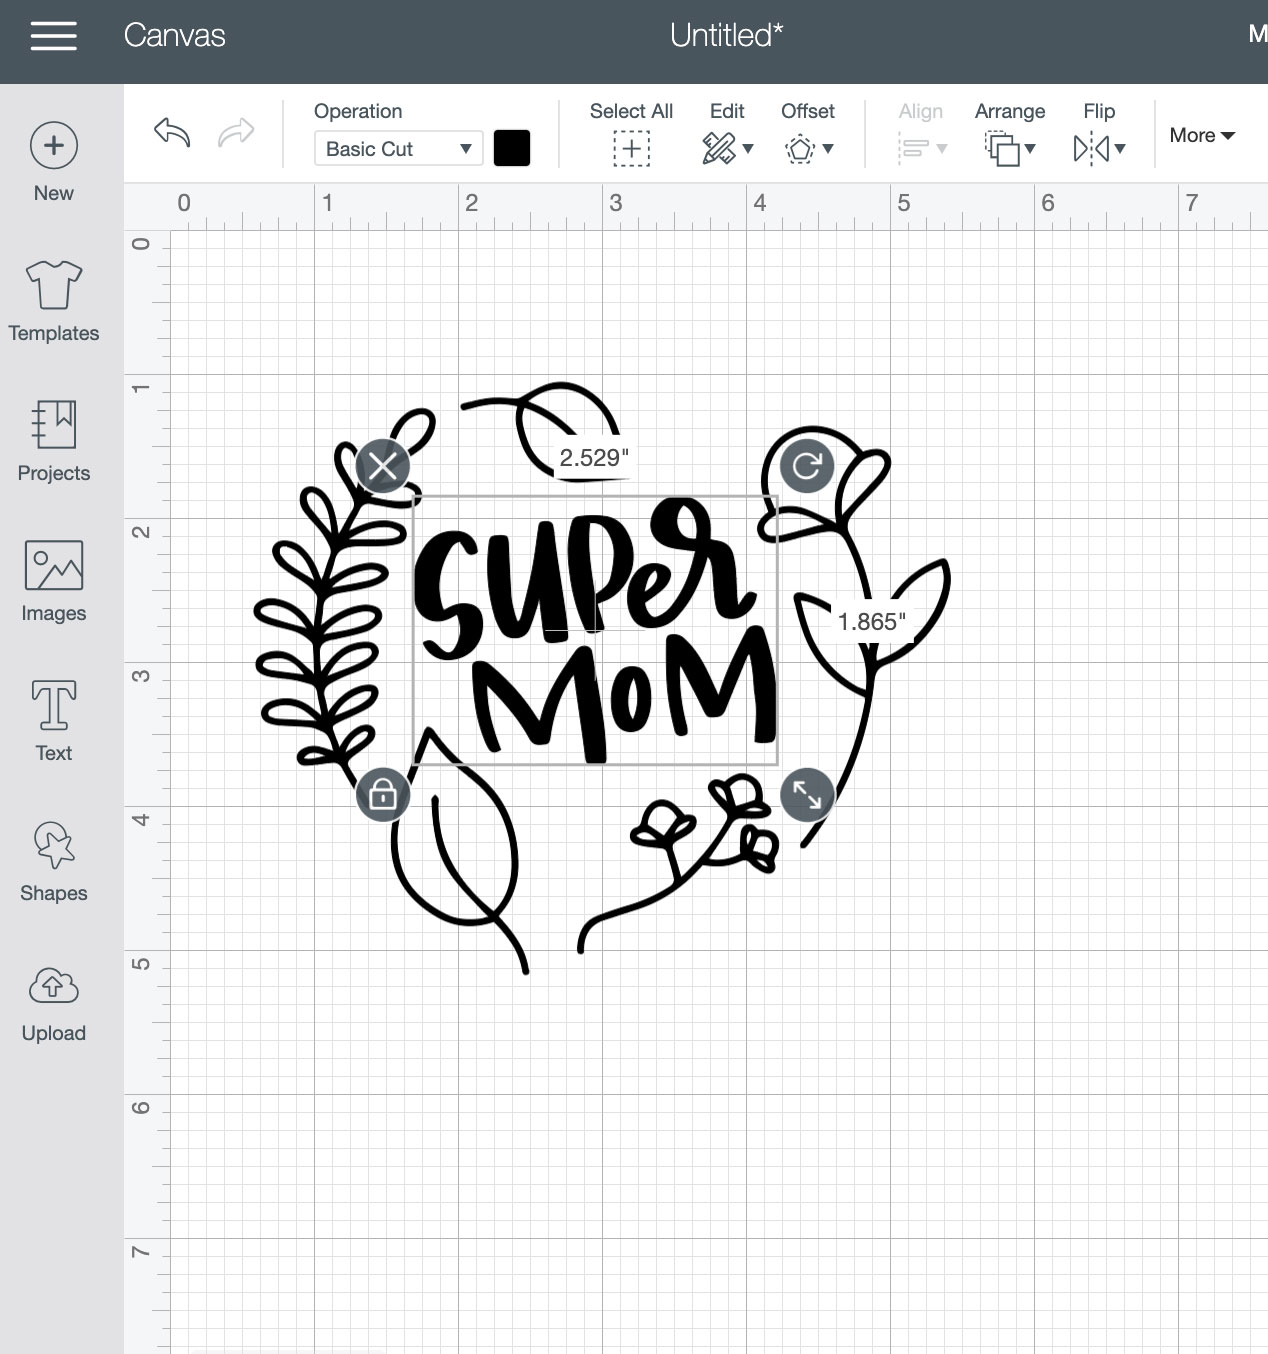 Mother's Day SVG files, Free Mother's Day SVG files, free SVG files, Cricut SVG files, free Silhouette SVG files